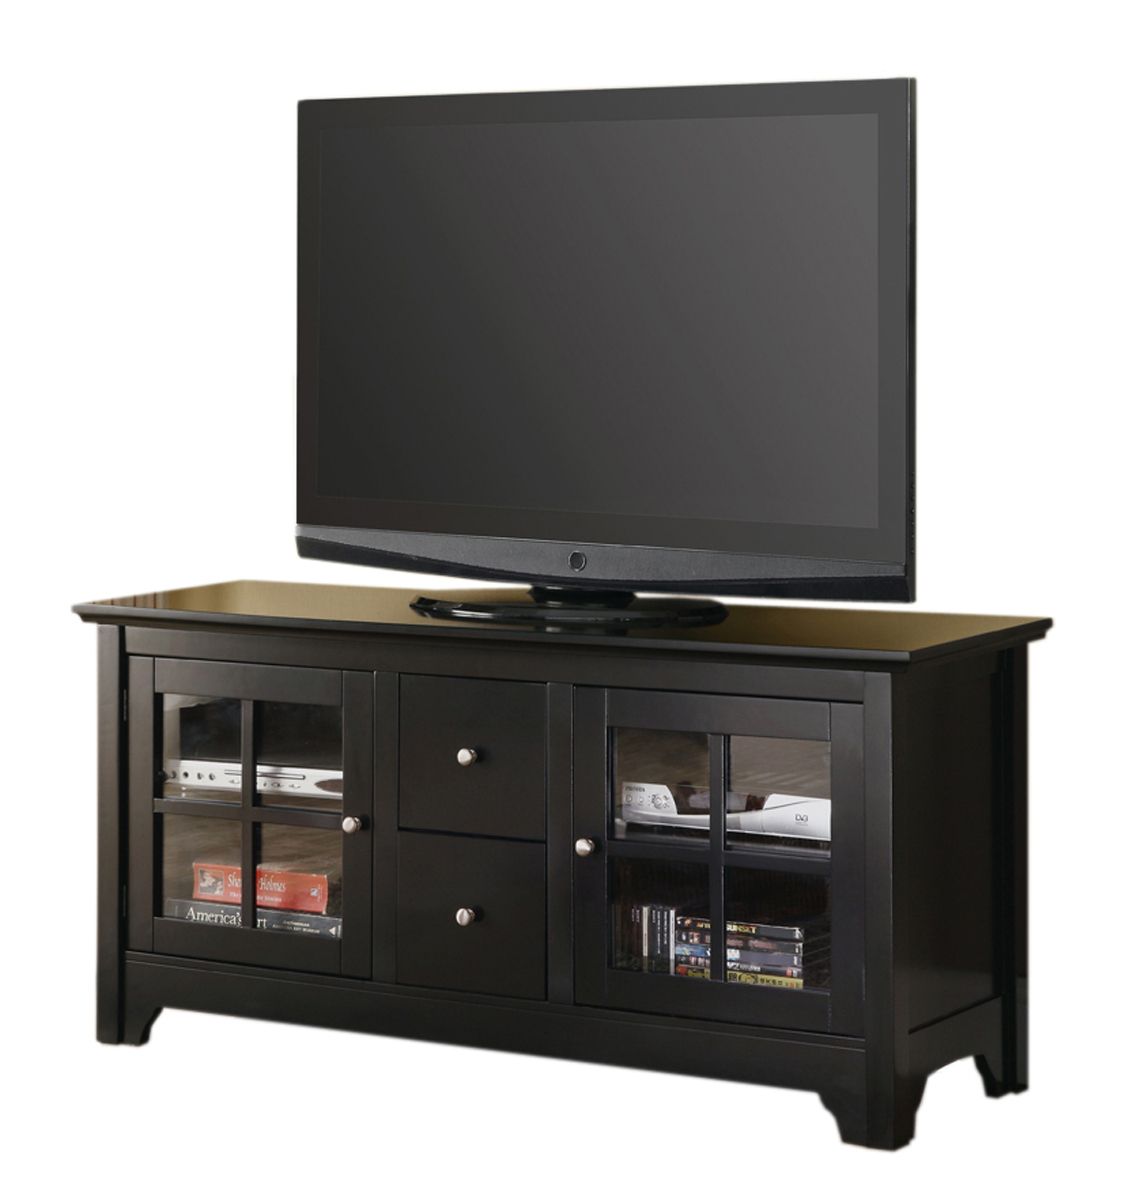 52 Inch Wood Tv Stand With Drawers And Glass Doors Regarding Wood And Glass Tv Stands For Flat Screens (View 6 of 15)